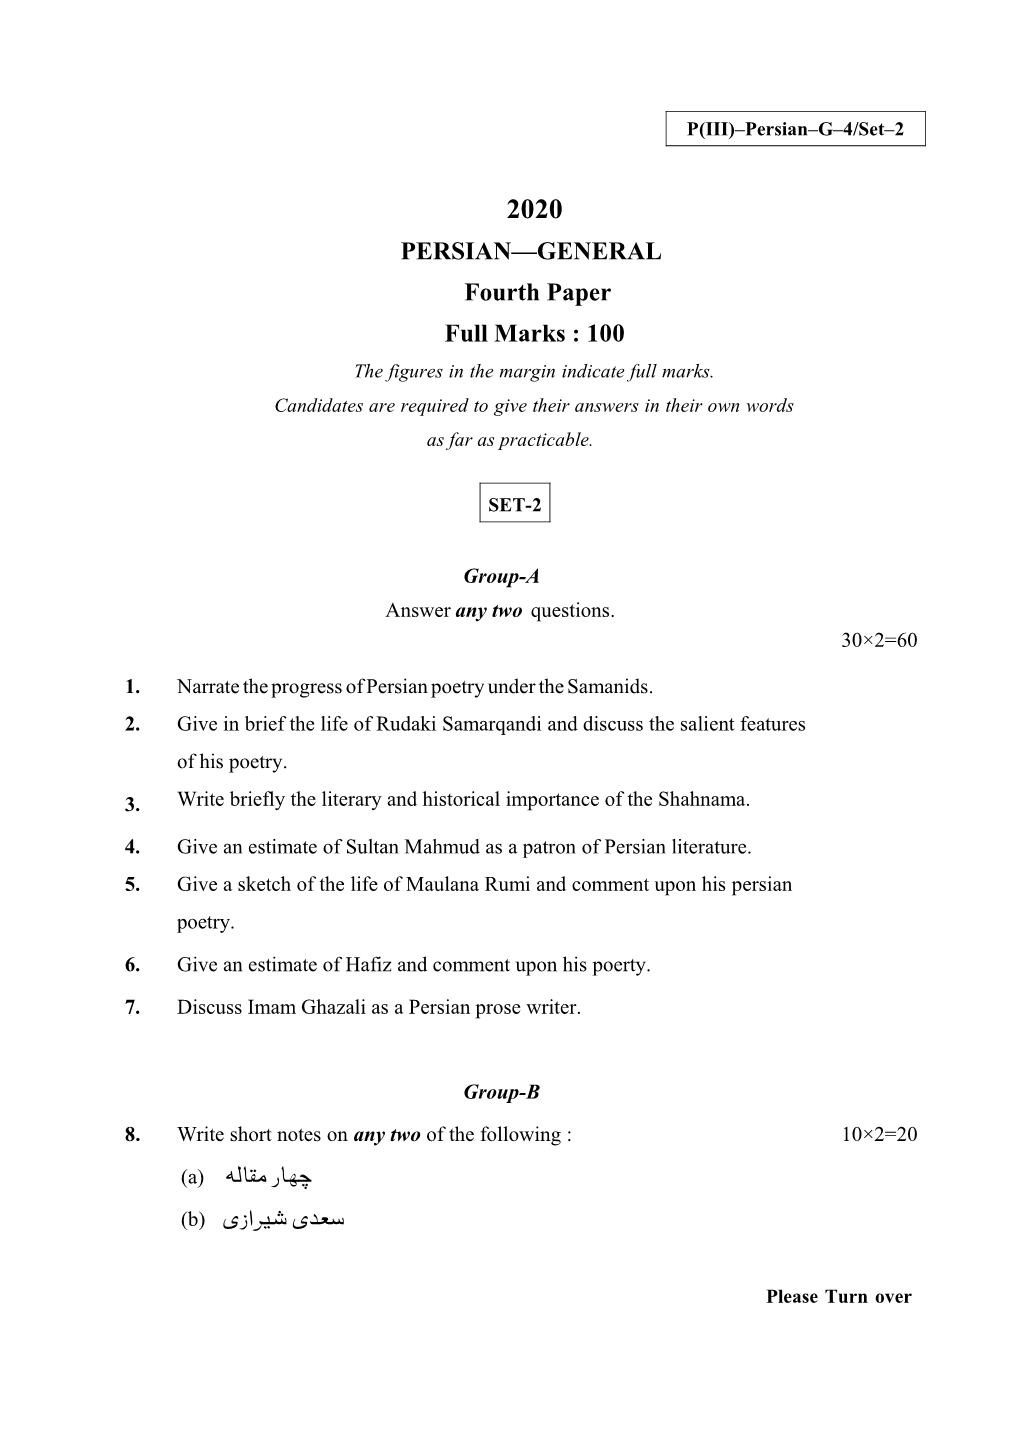 PERSIAN—GENERAL Fourth Paper Full Marks : 100 the Figures in the Margin Indicate Full Marks